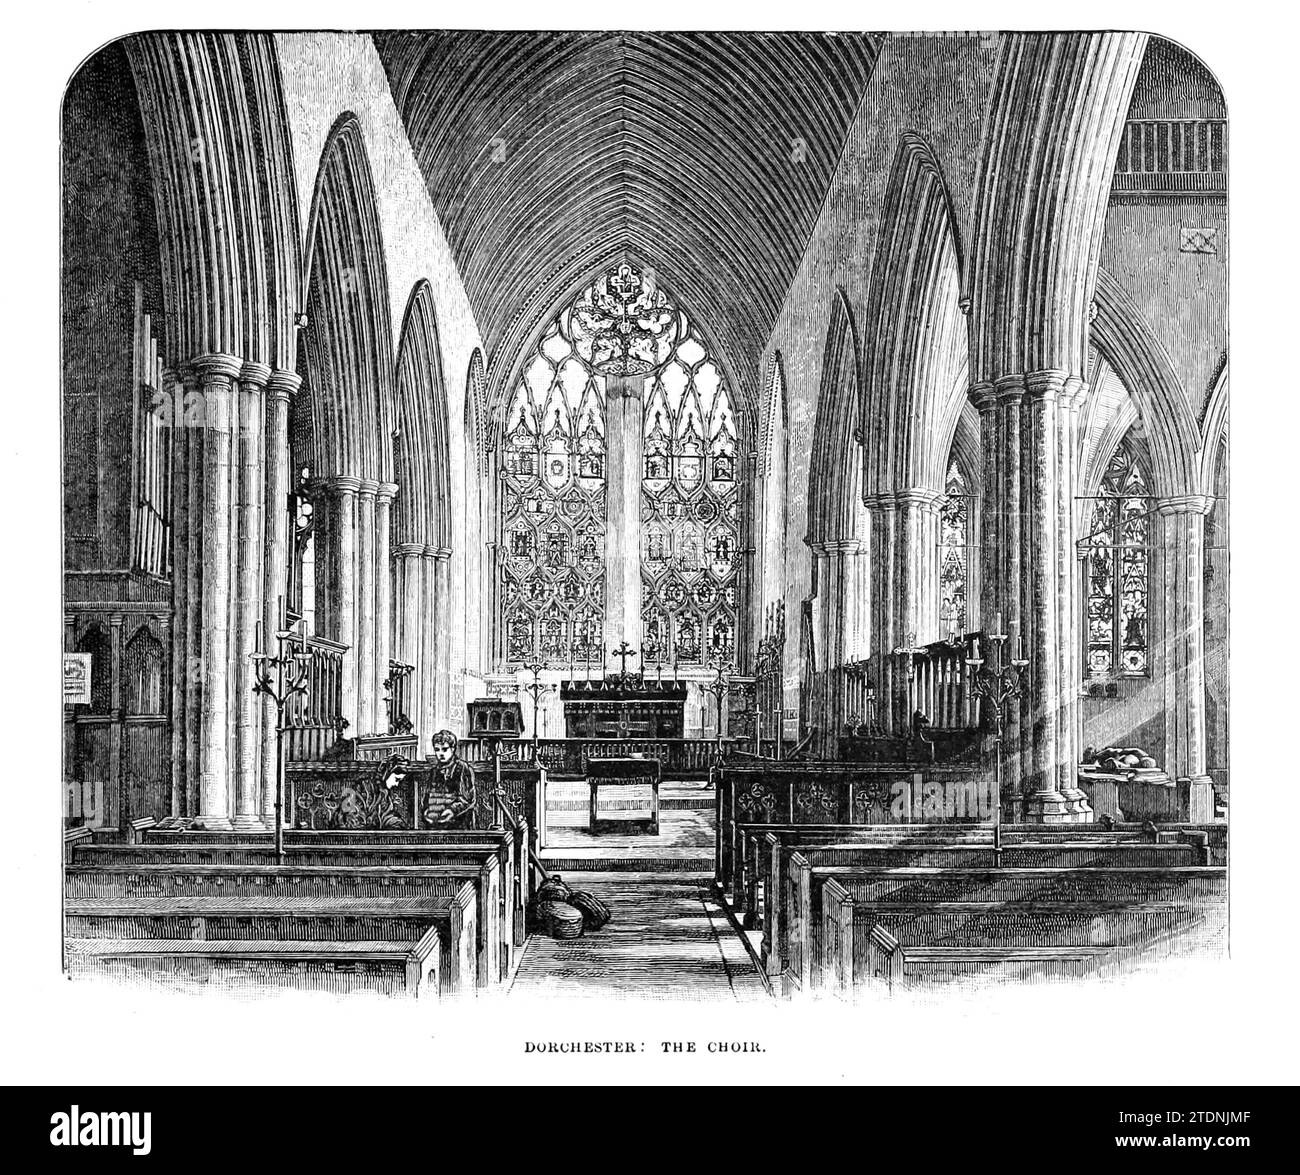 Dorchester, The Choir from the book ' Cathedrals, abbeys and churches of England and Wales : descriptive, historical, pictorial ' Volume 2 by Bonney, T. G. (Thomas George), 1833-1923; Publisher London : Cassell 1890 Stock Photo